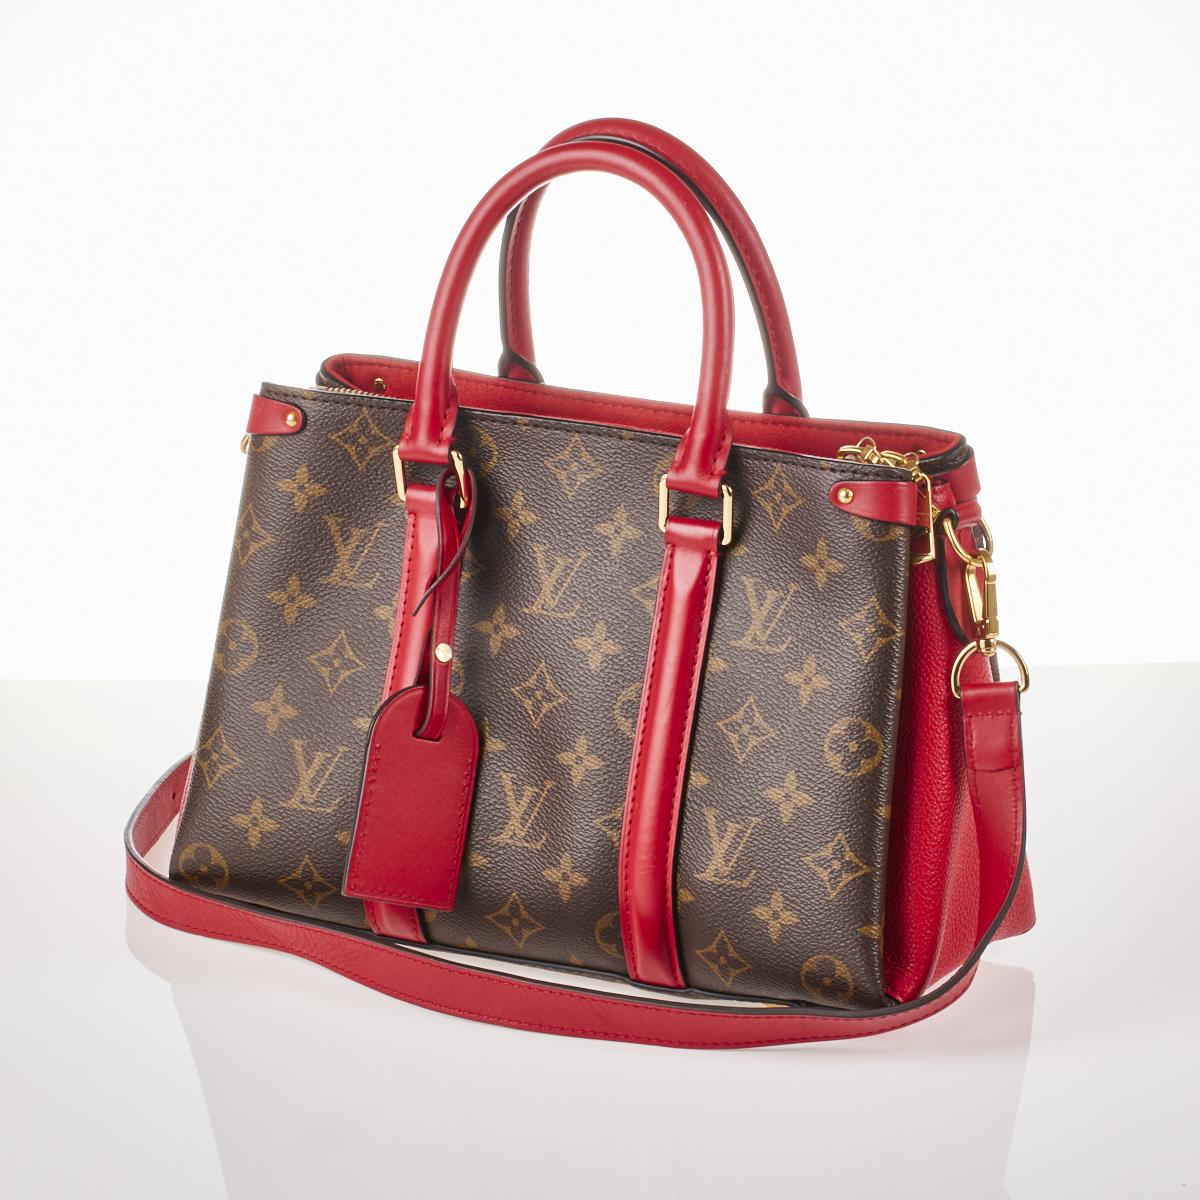 Sold at Auction: Louis Vuitton - Totally Tote Bag - Shoulder Strap